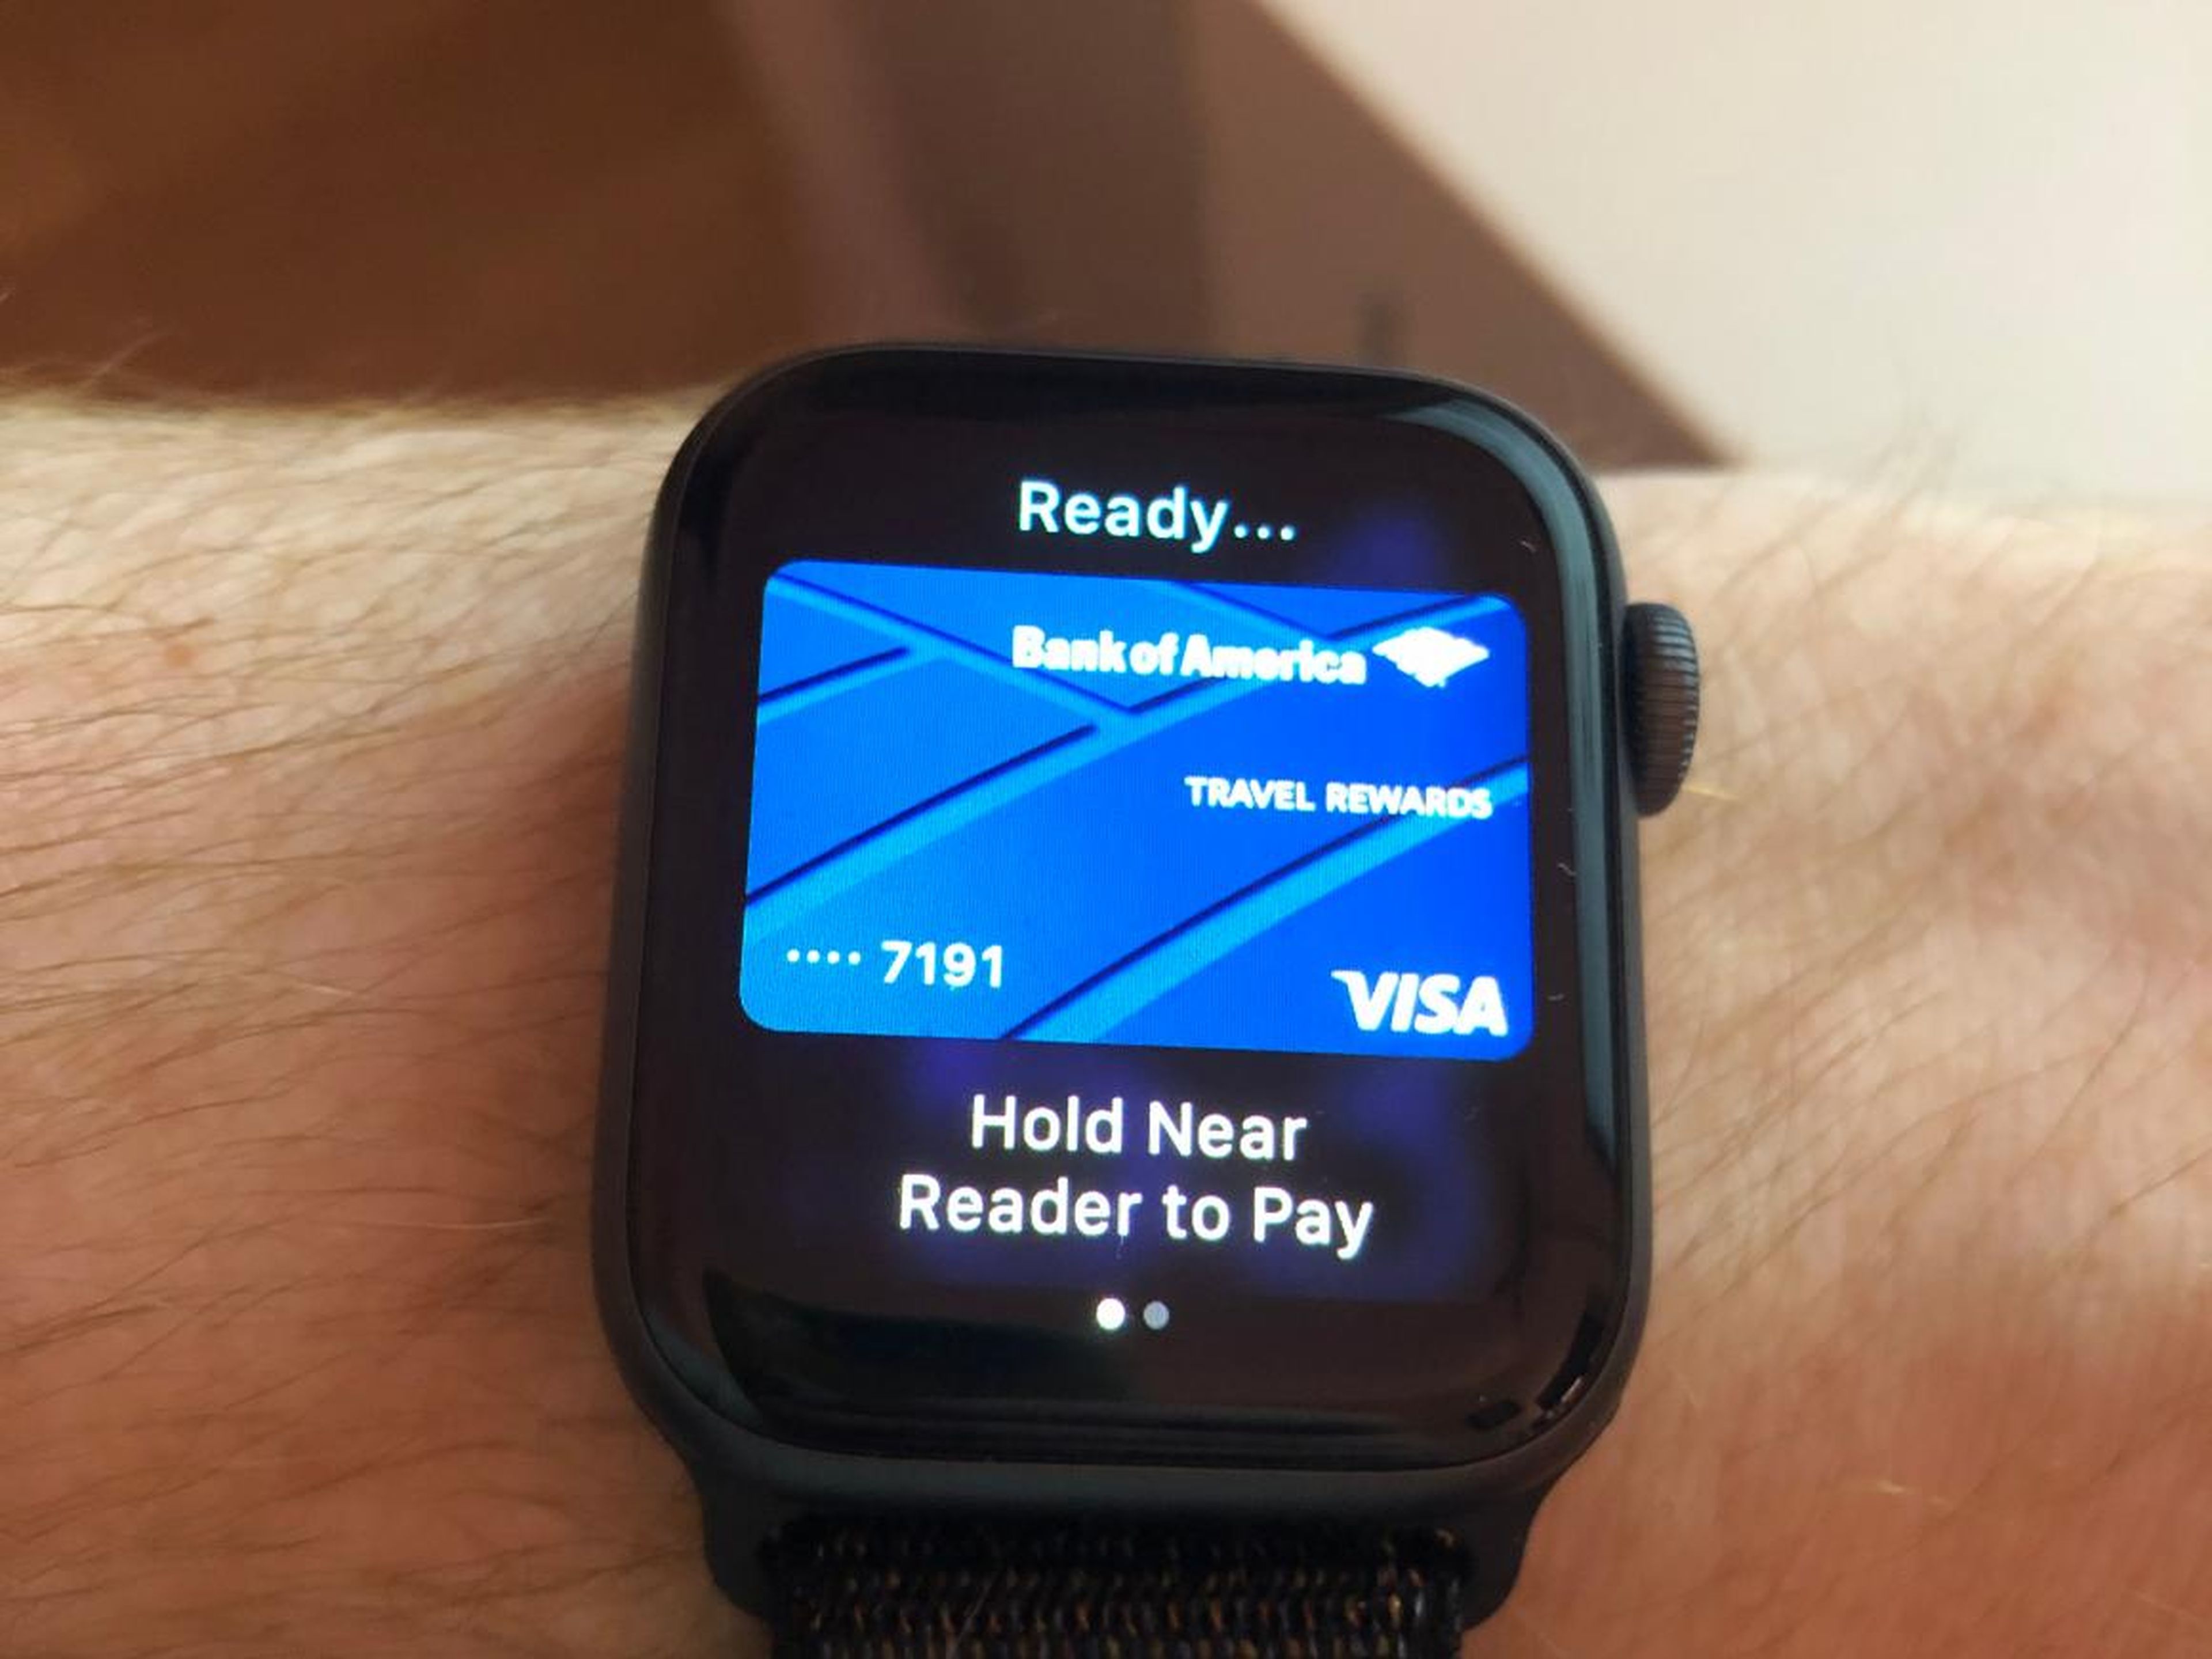 9. Paying for goods with your Apple Watch is easy, fast, and futuristic.